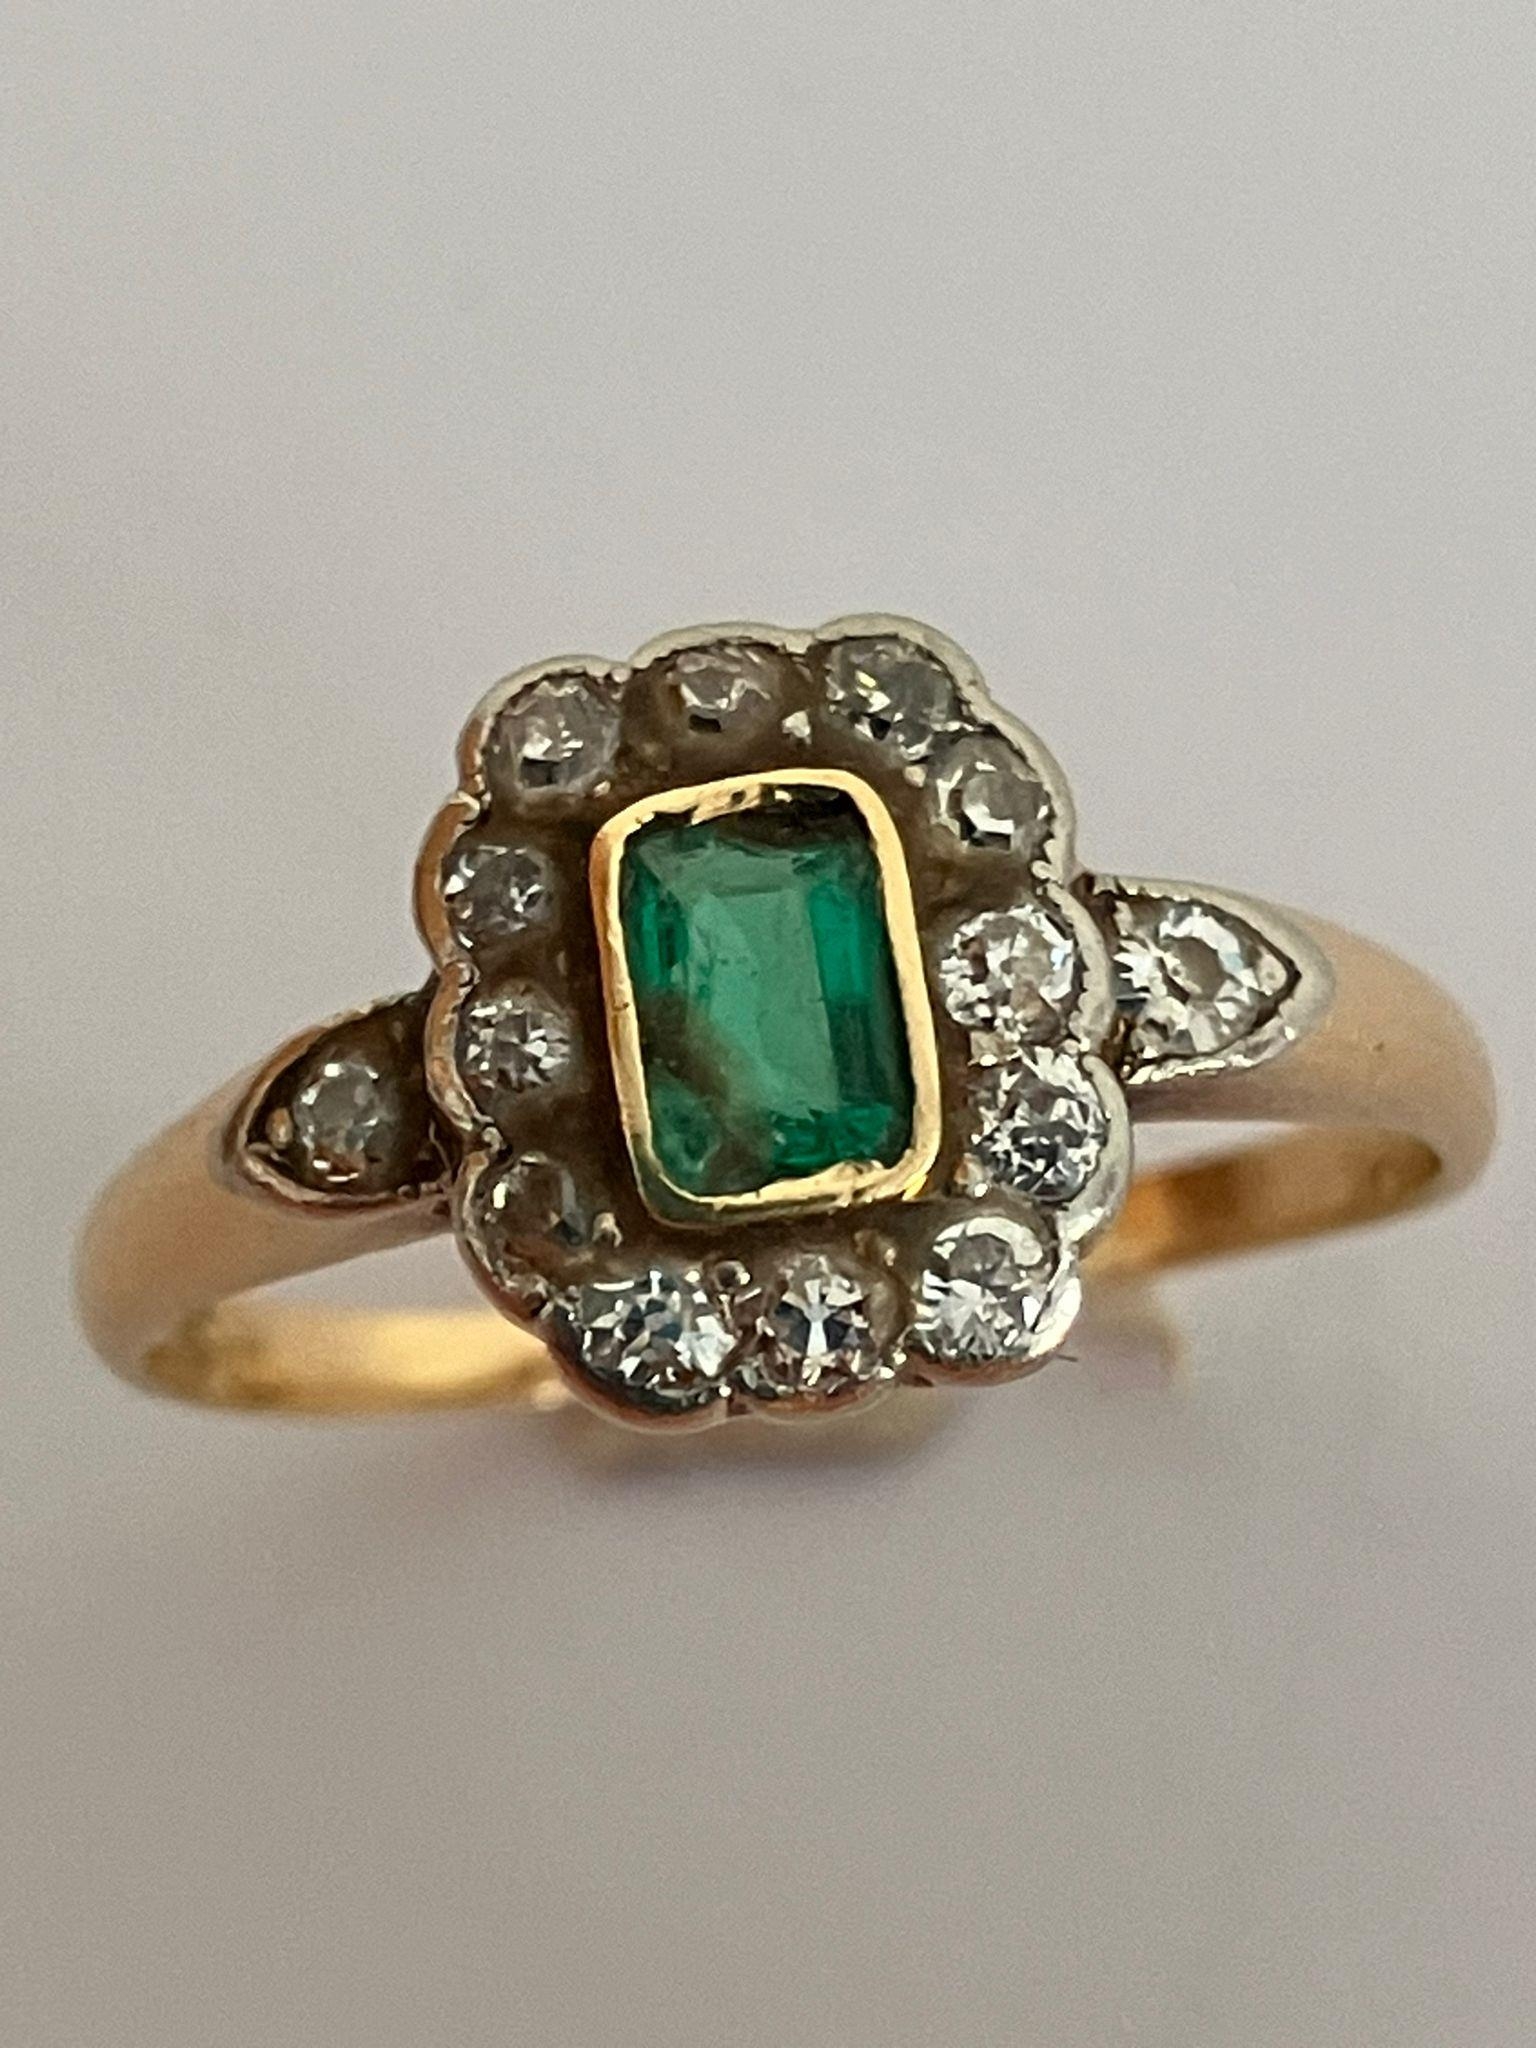 Antique 18 carat yellow GOLD RING set with EMERALD and DIAMONDS. 2.5 grams. Size O 1/2. - Image 2 of 2